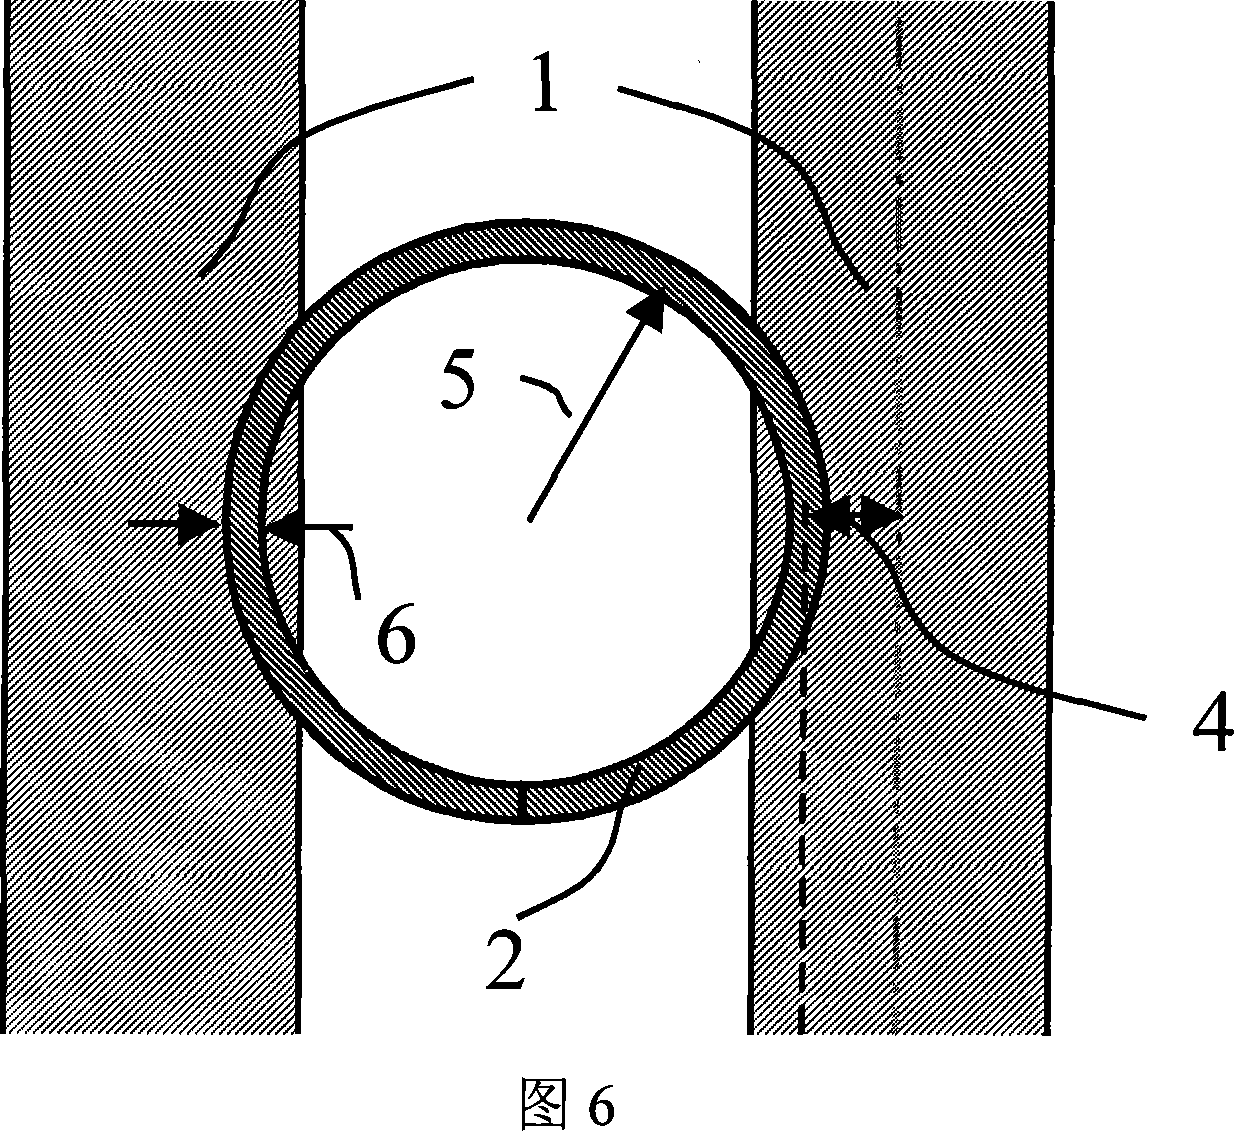 Built-in coupling optical ring cavity device